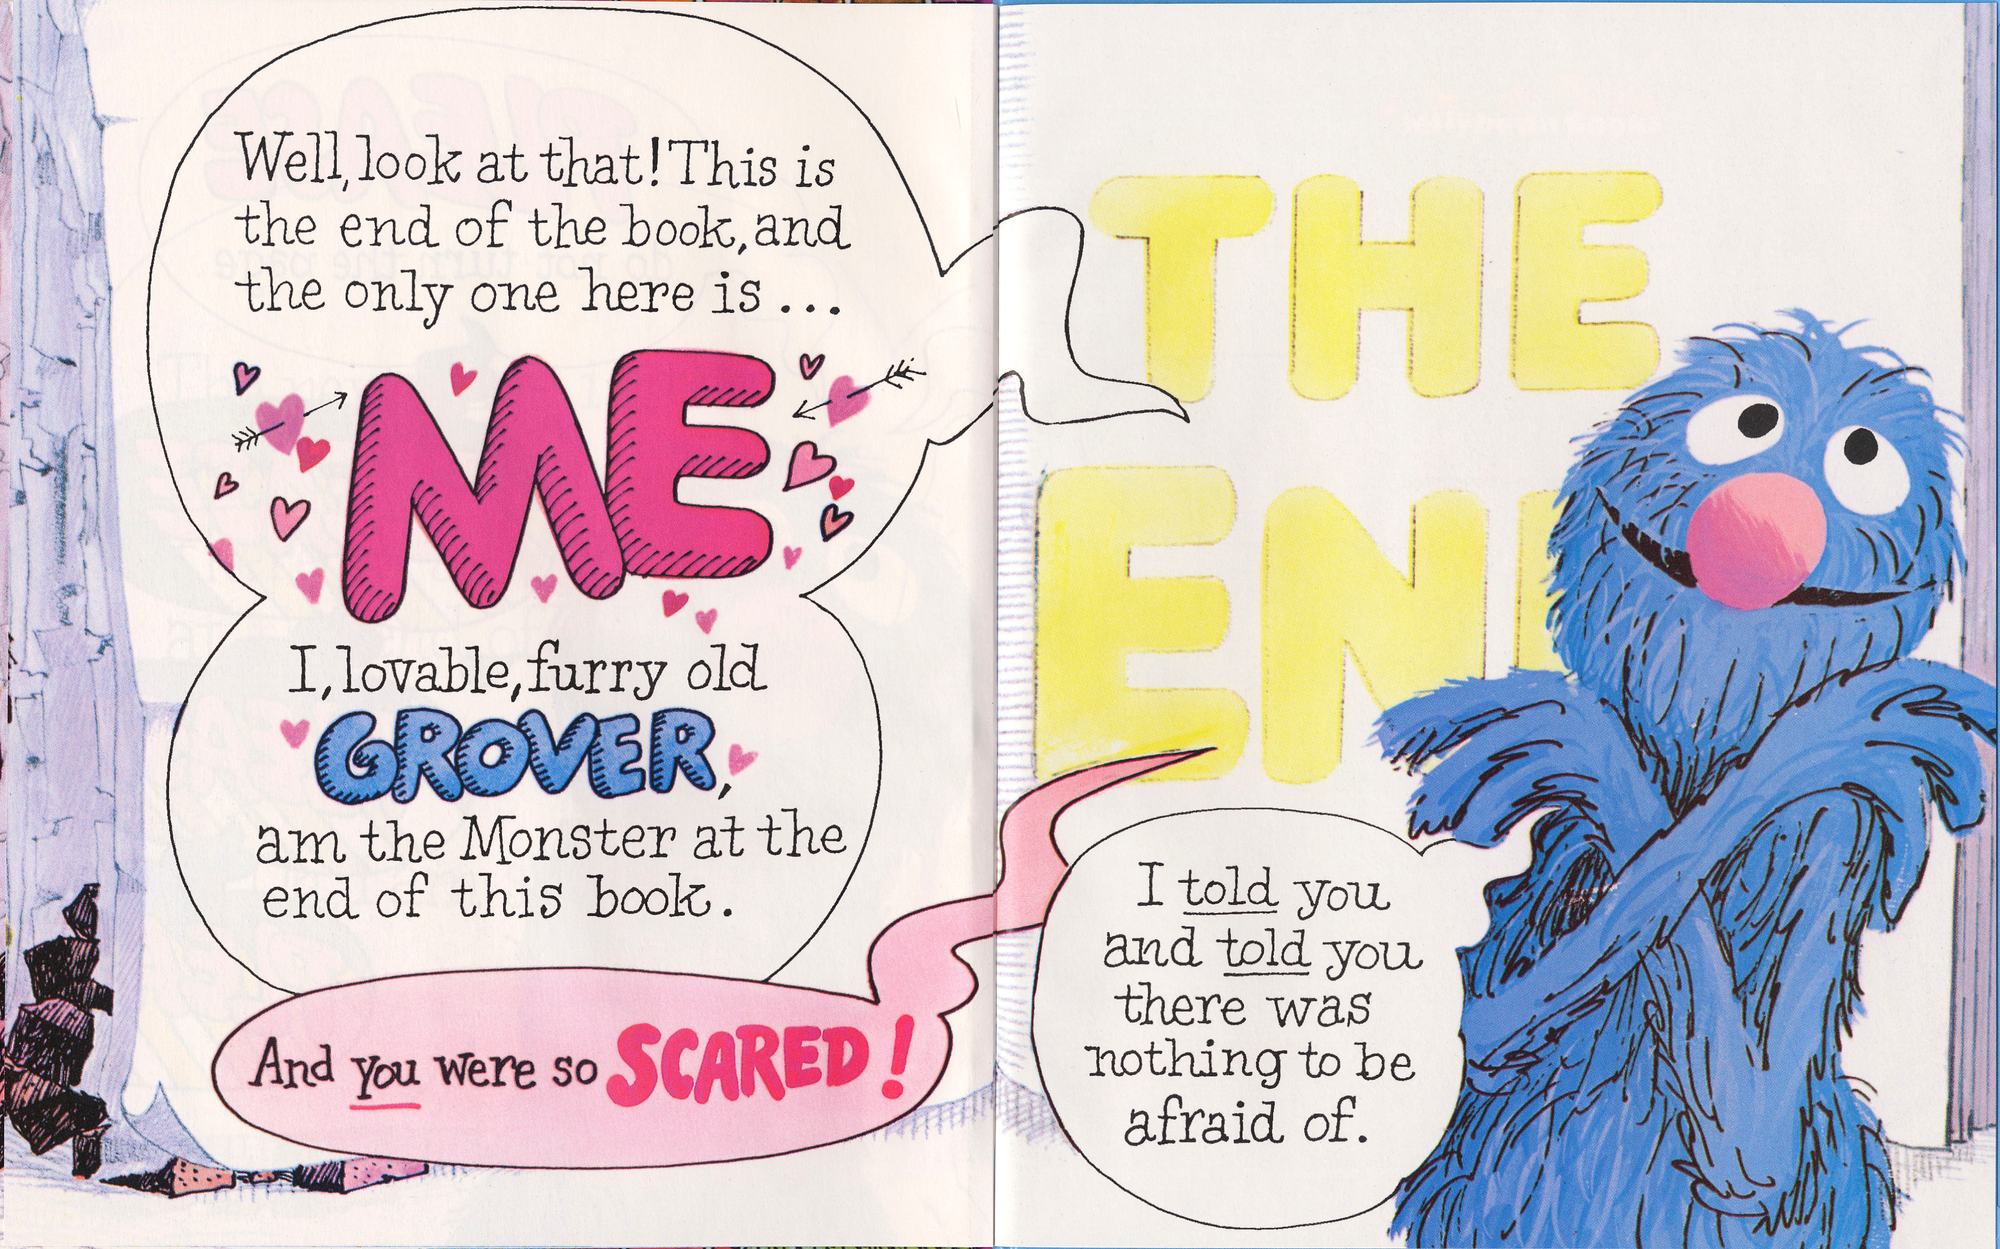 The end of The Monster at the End of This Book, where Grover realizes that he is the monster.